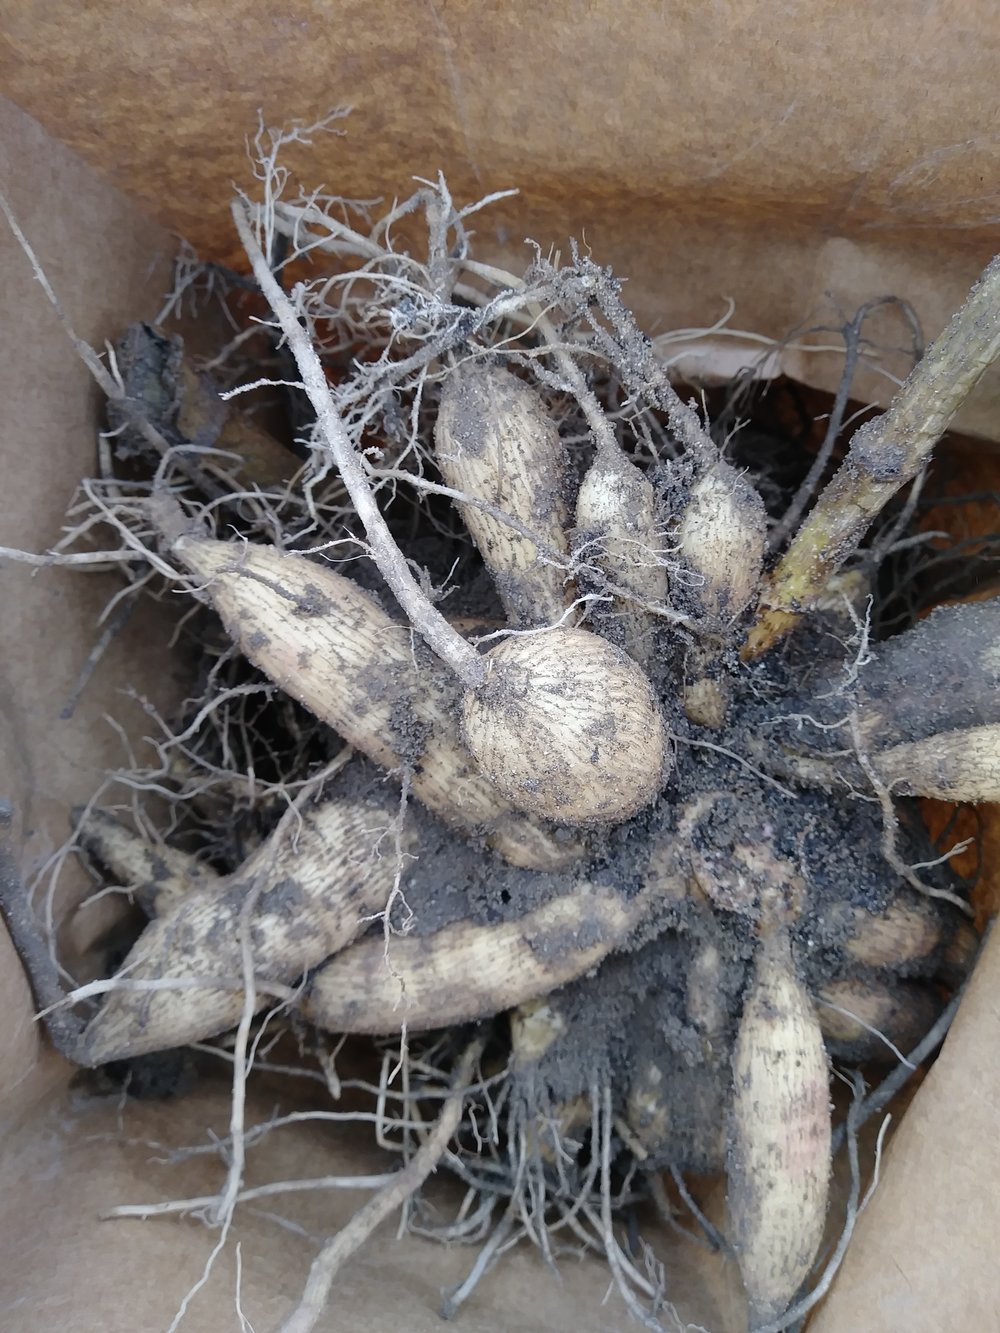 Tubers in a paper bag ready for winter storage.